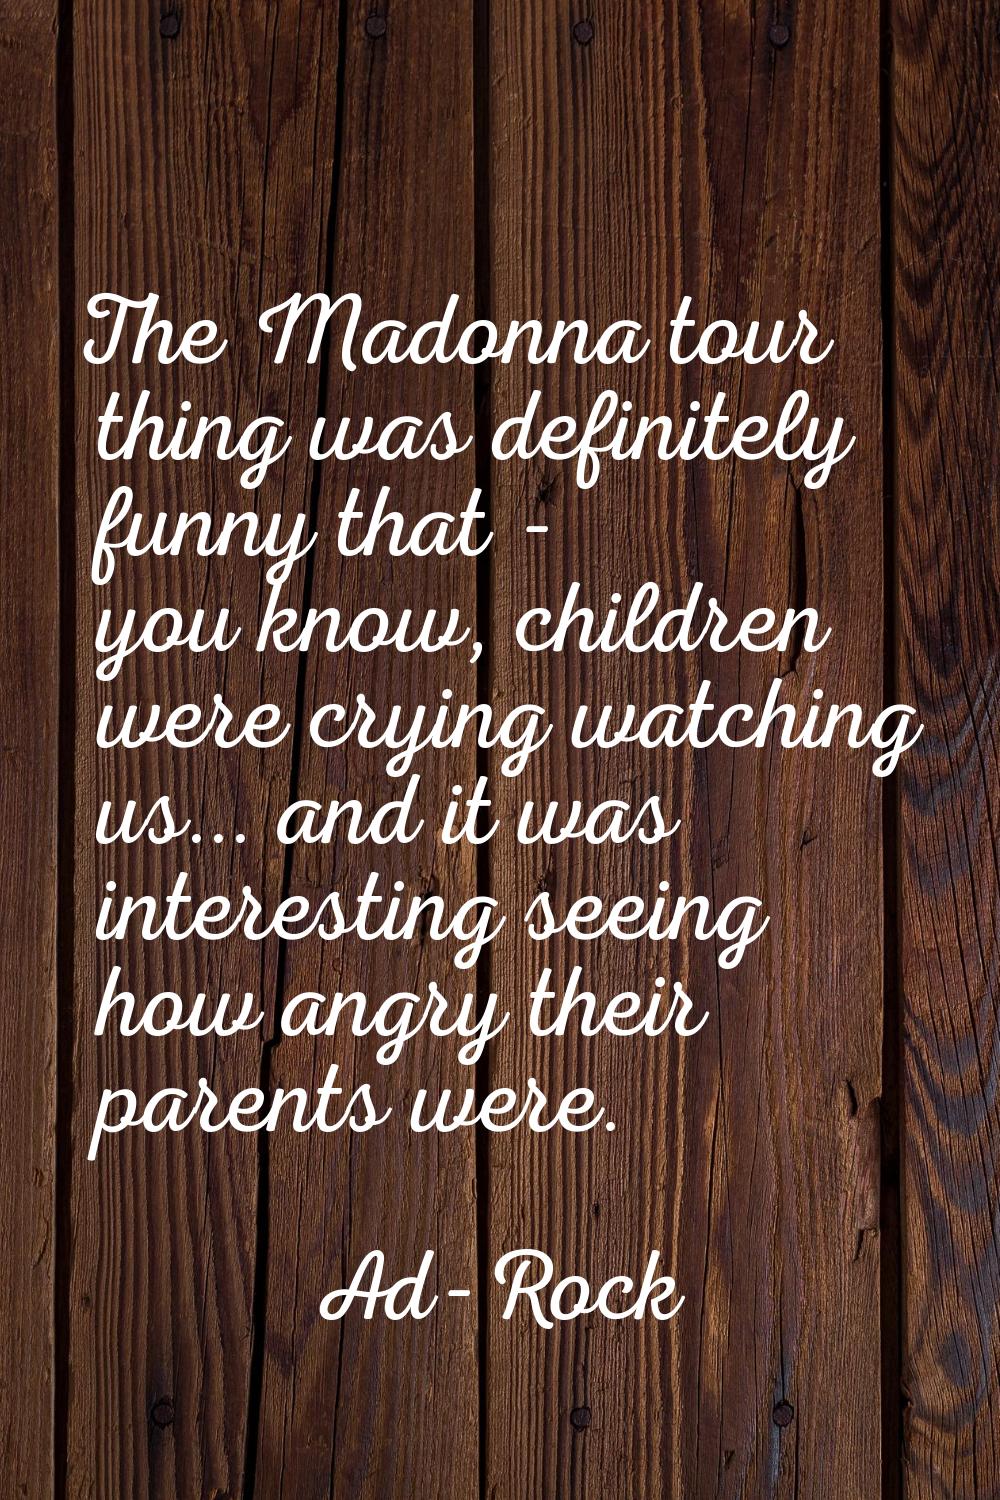 The Madonna tour thing was definitely funny that - you know, children were crying watching us... an